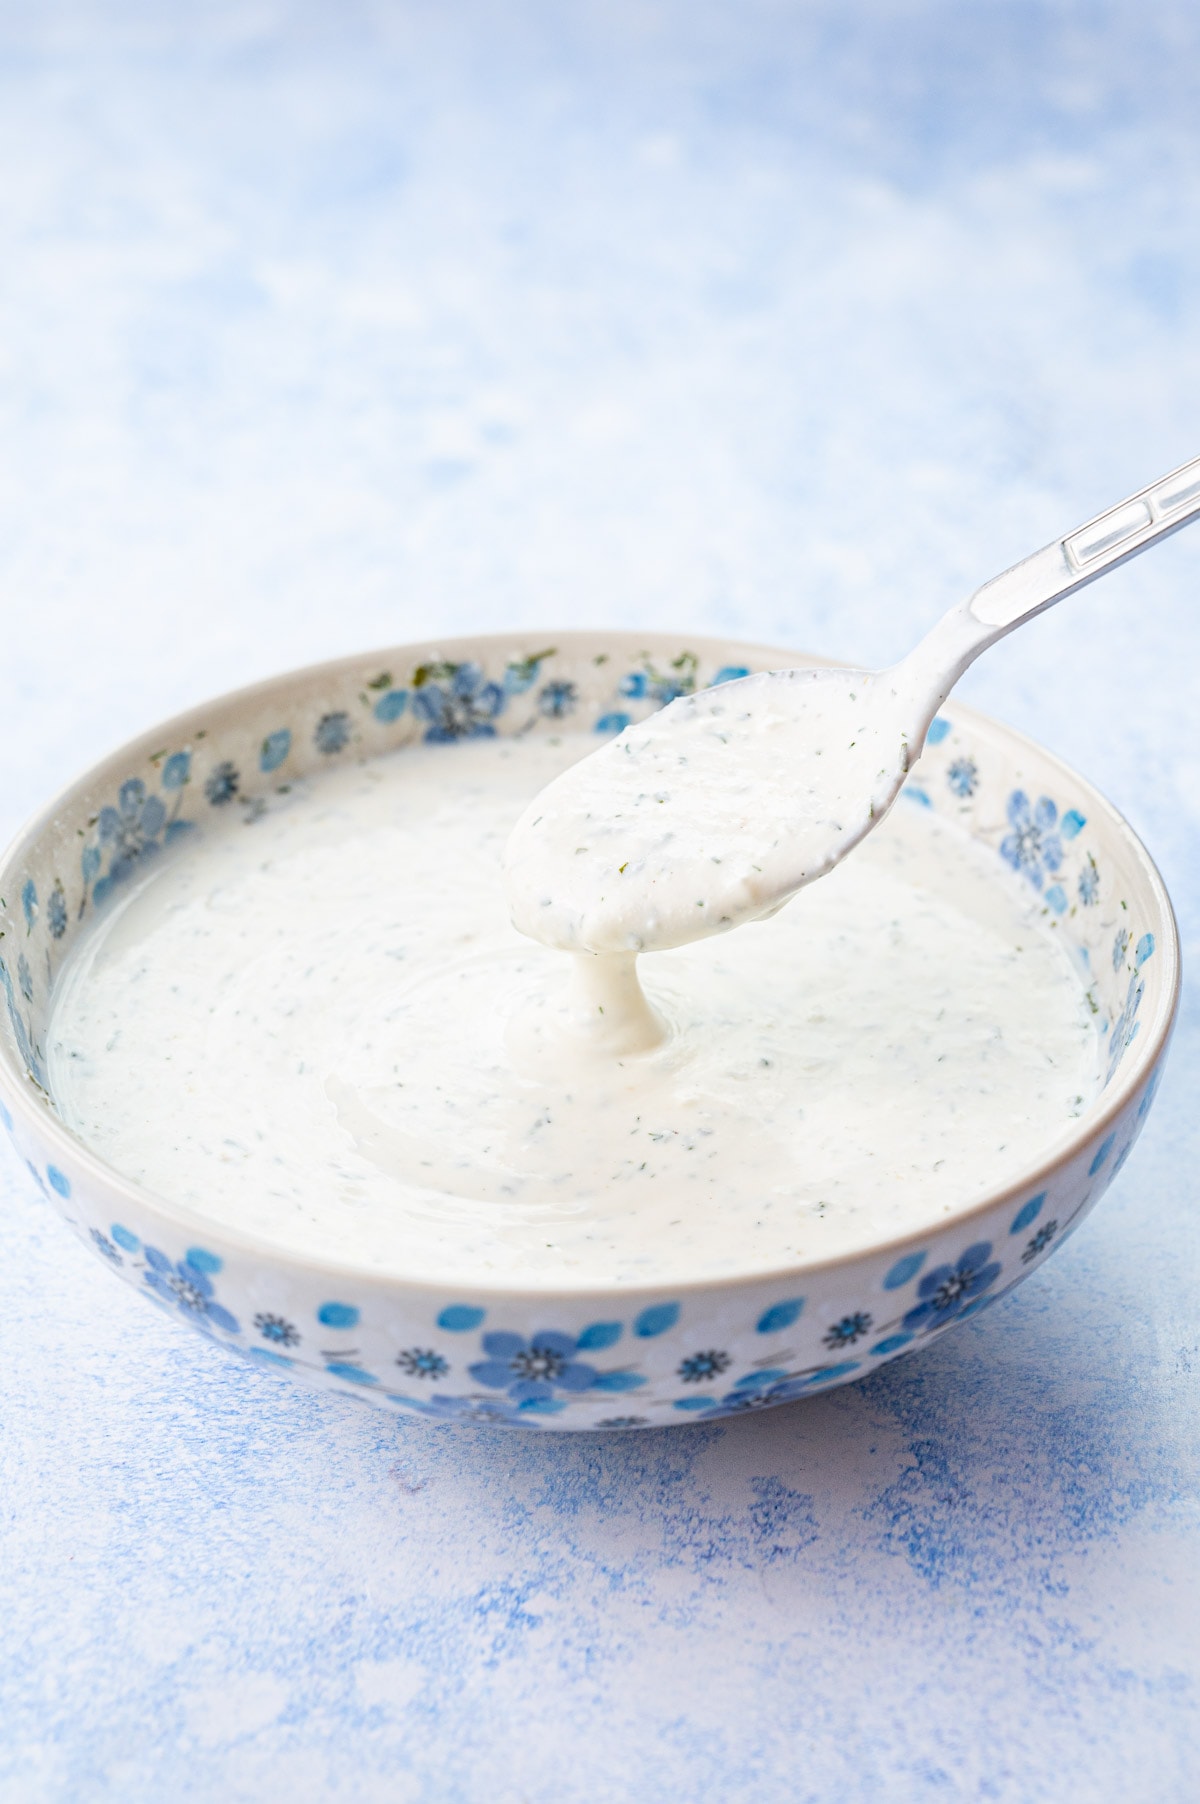 Ranch dressing in a white-blue bowl on a blue background.